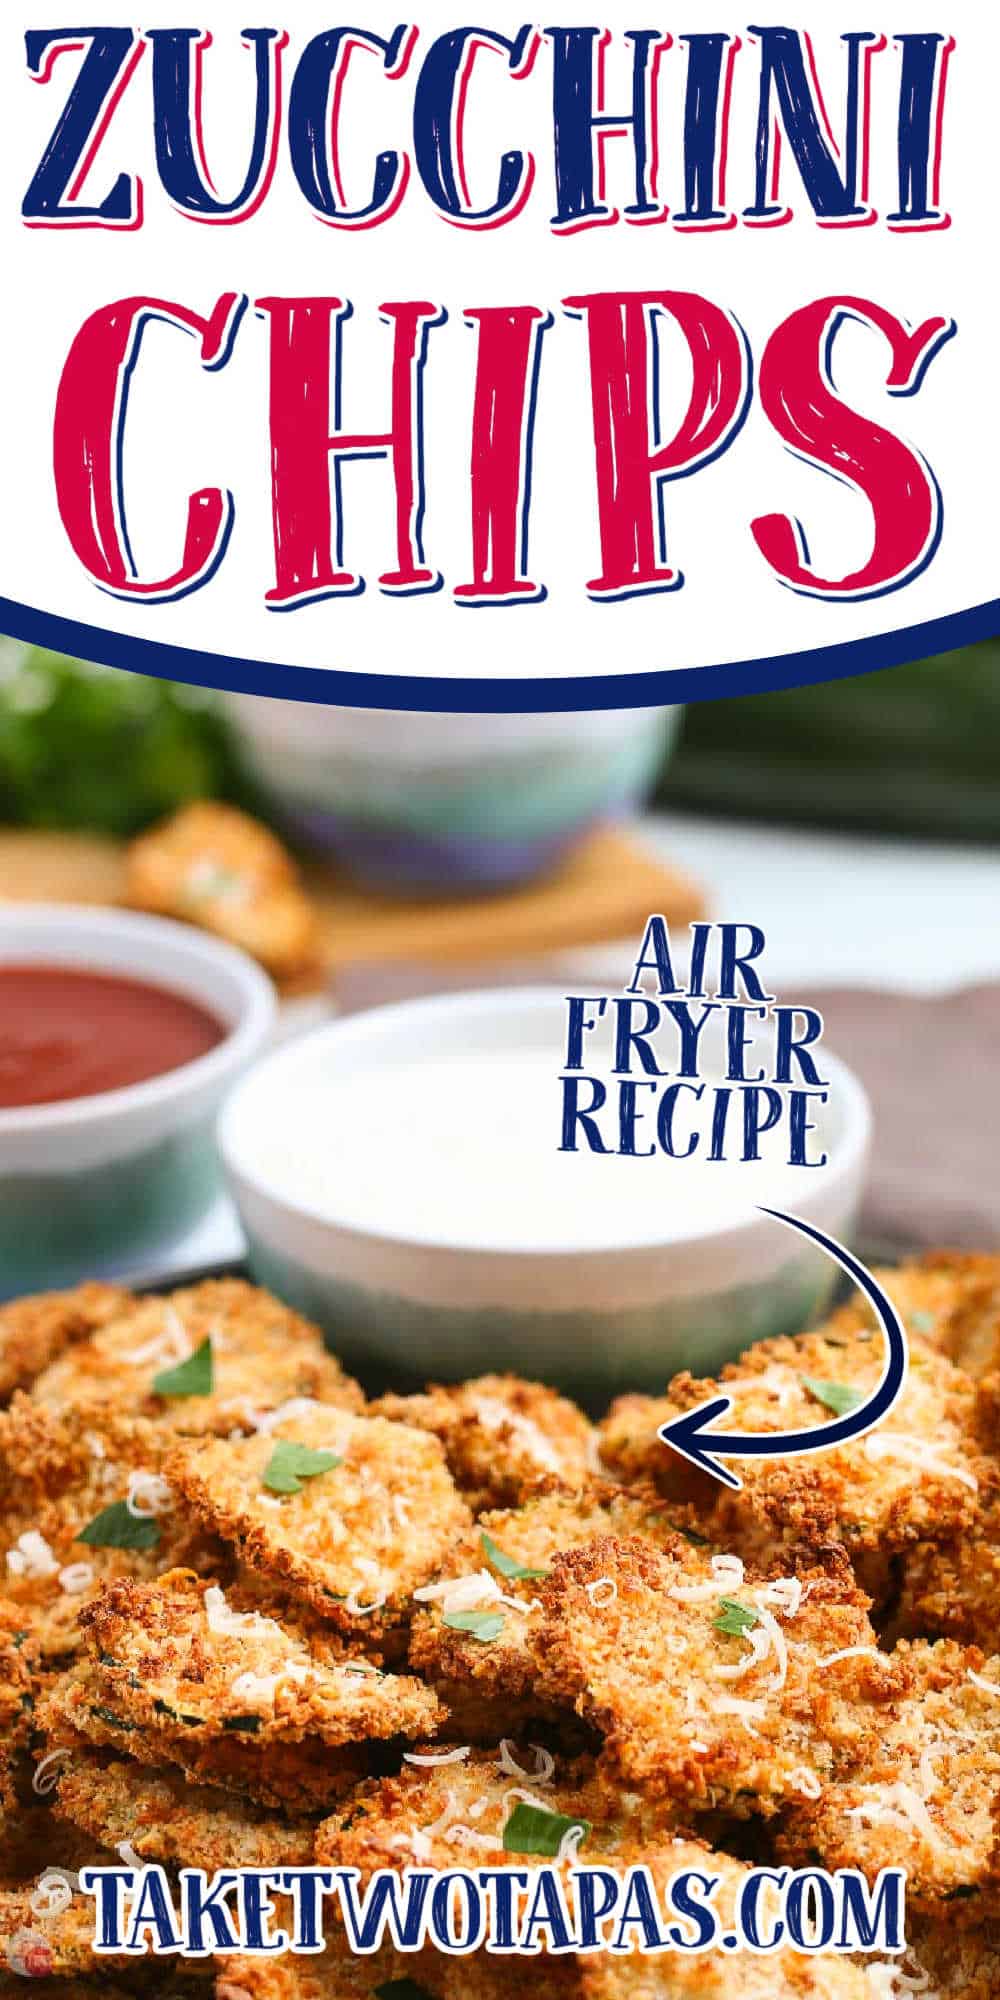 collage of zucchini chips with text "air fryer"